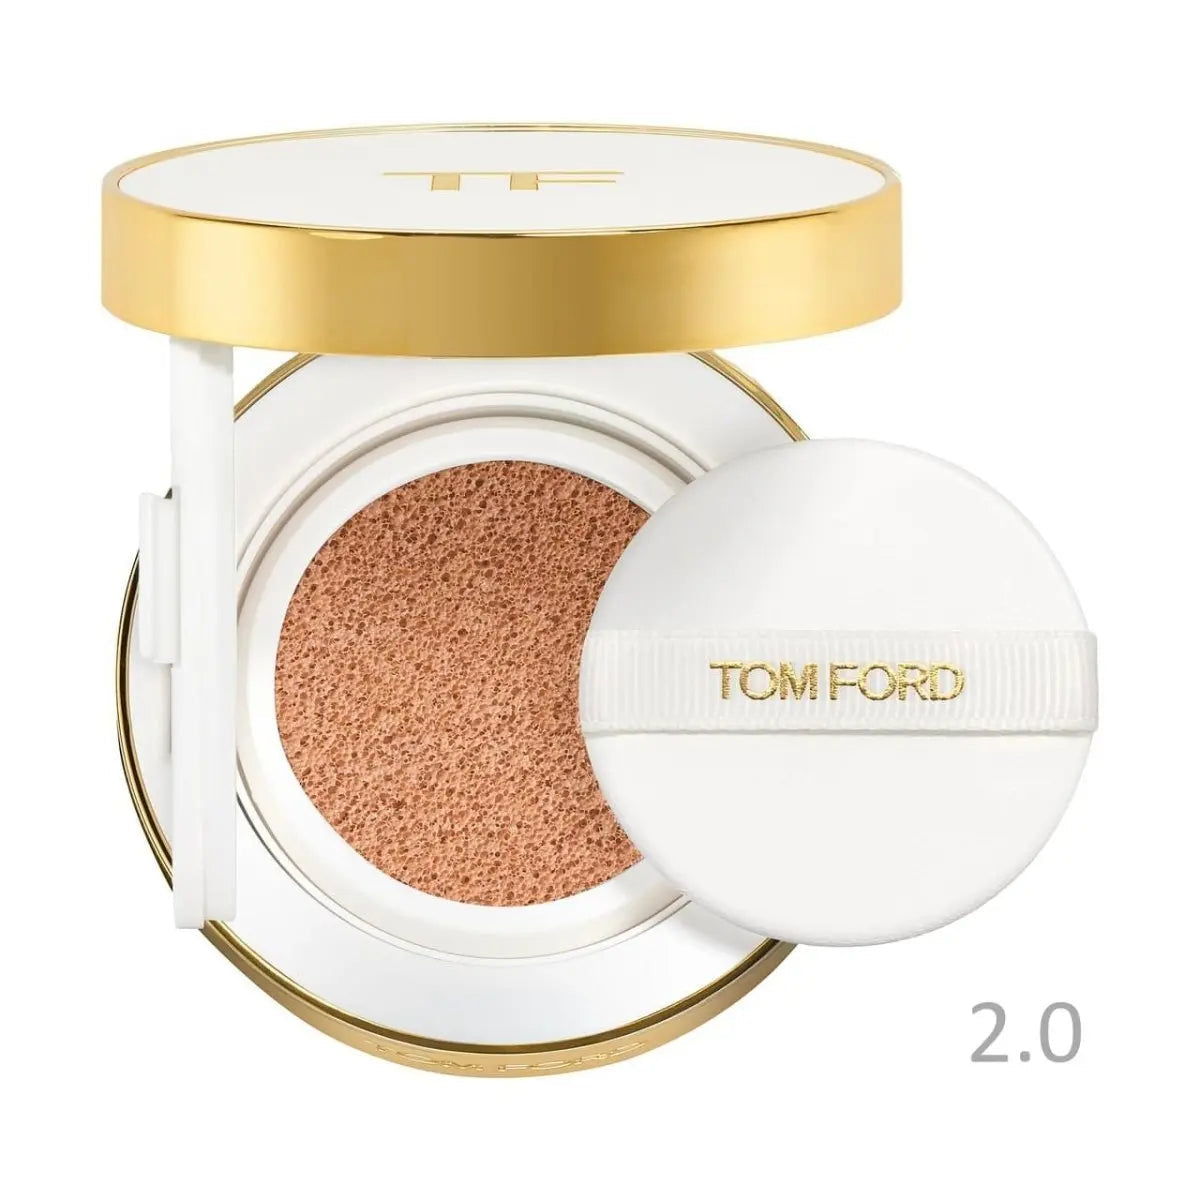 Tom ford Tom Ford Glow Tone Up fond de teint hydratant coussin rembourré compact Spf40 Buff